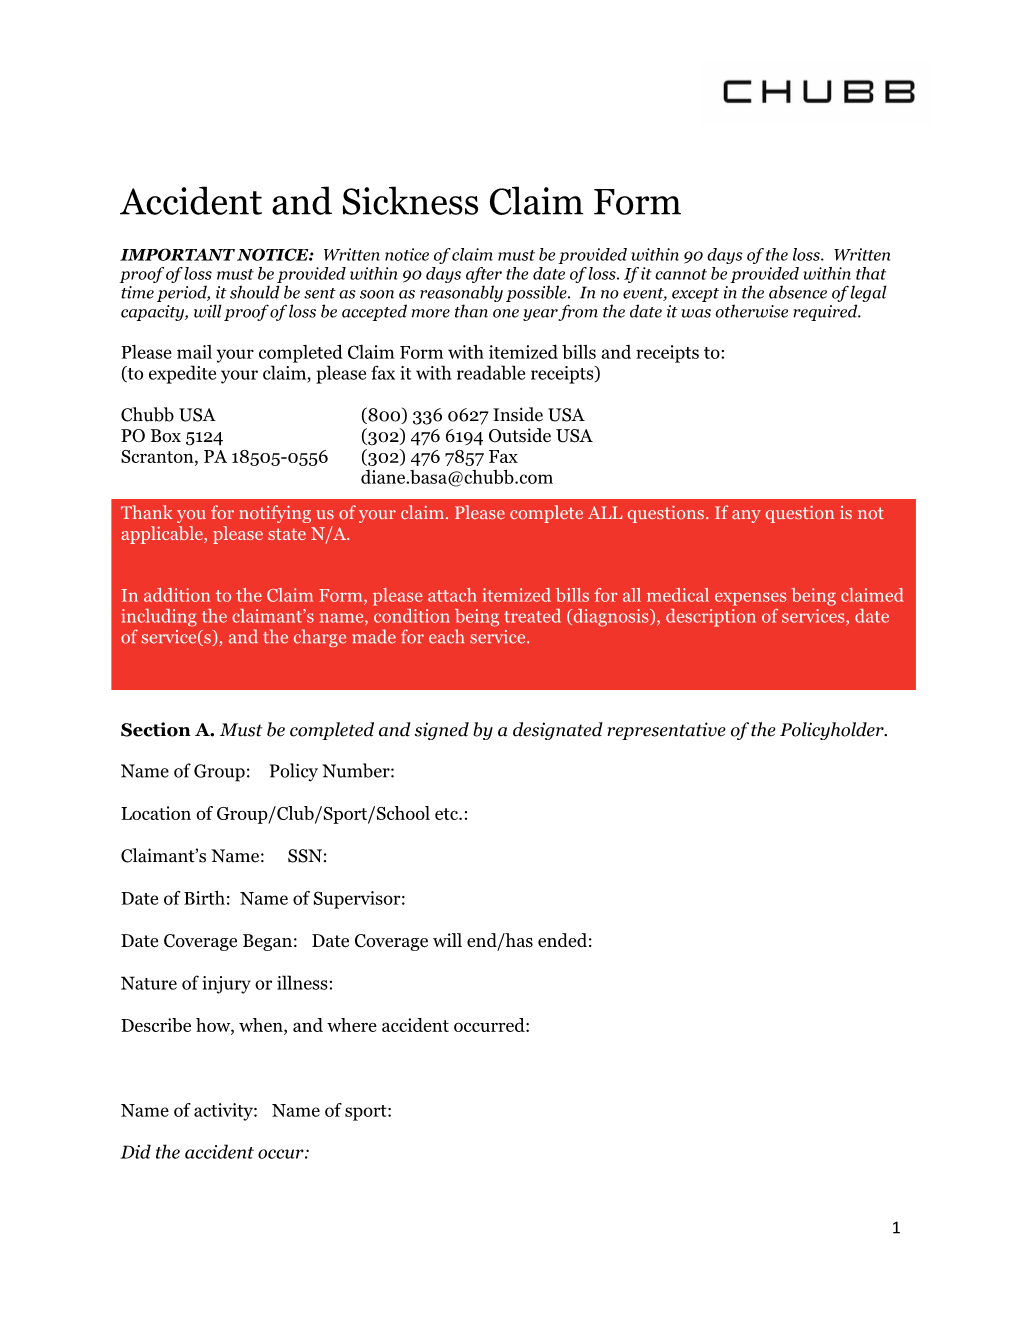 Accident and Sickness Claim Form